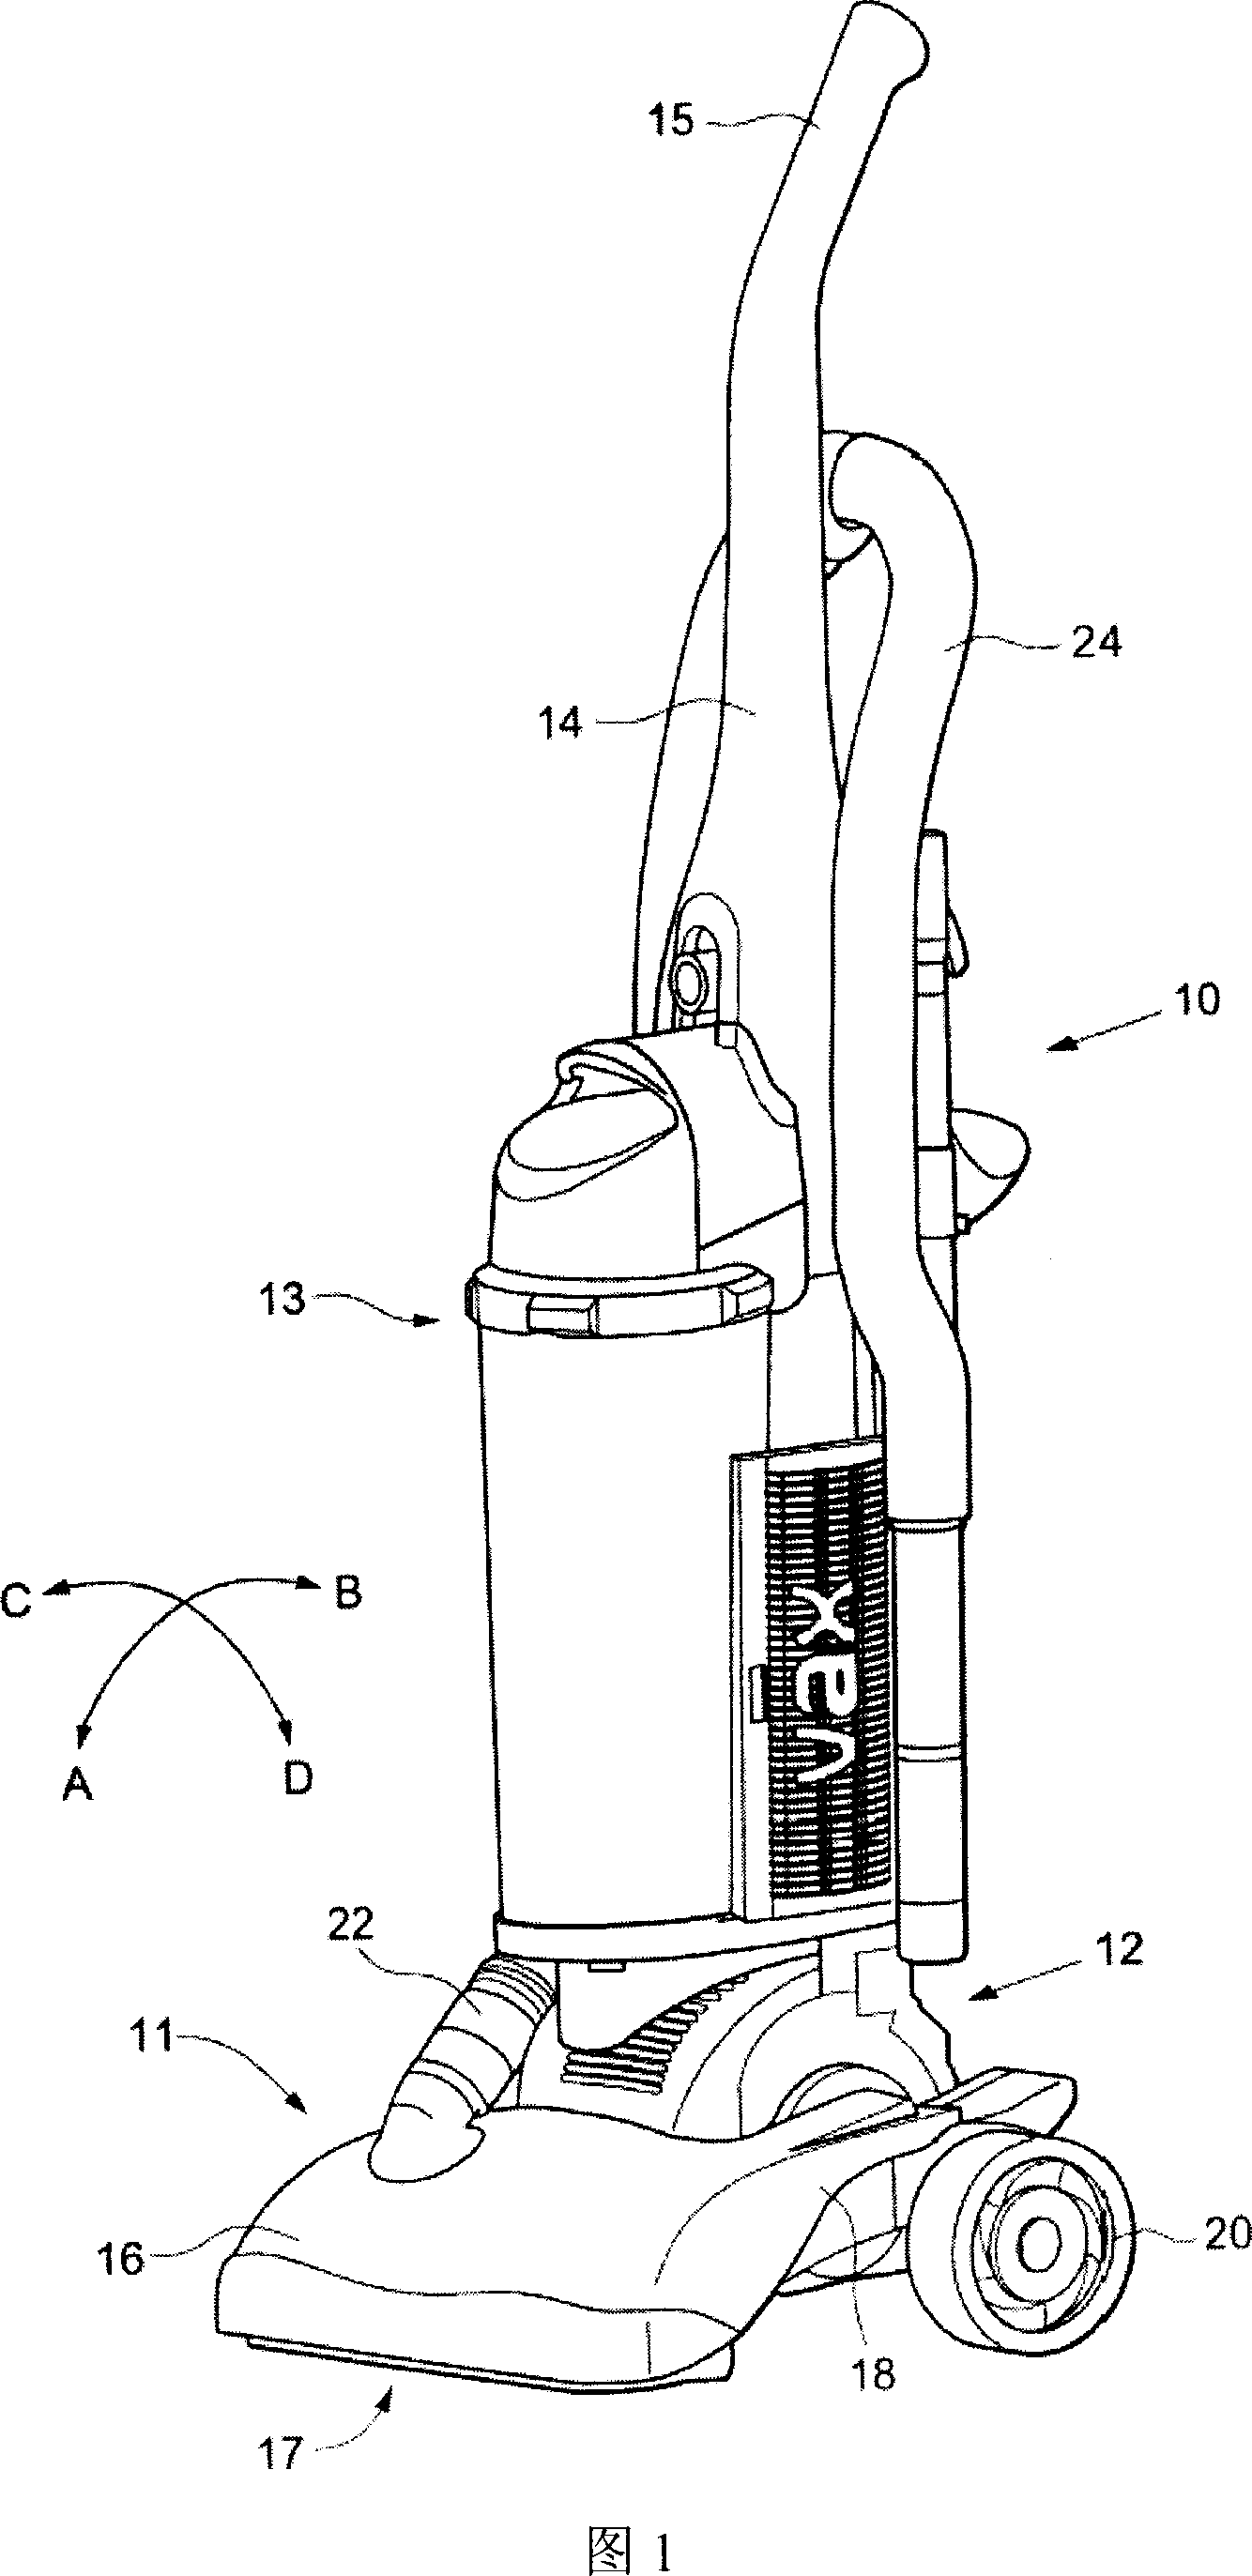 Upright-type cleaning appliances